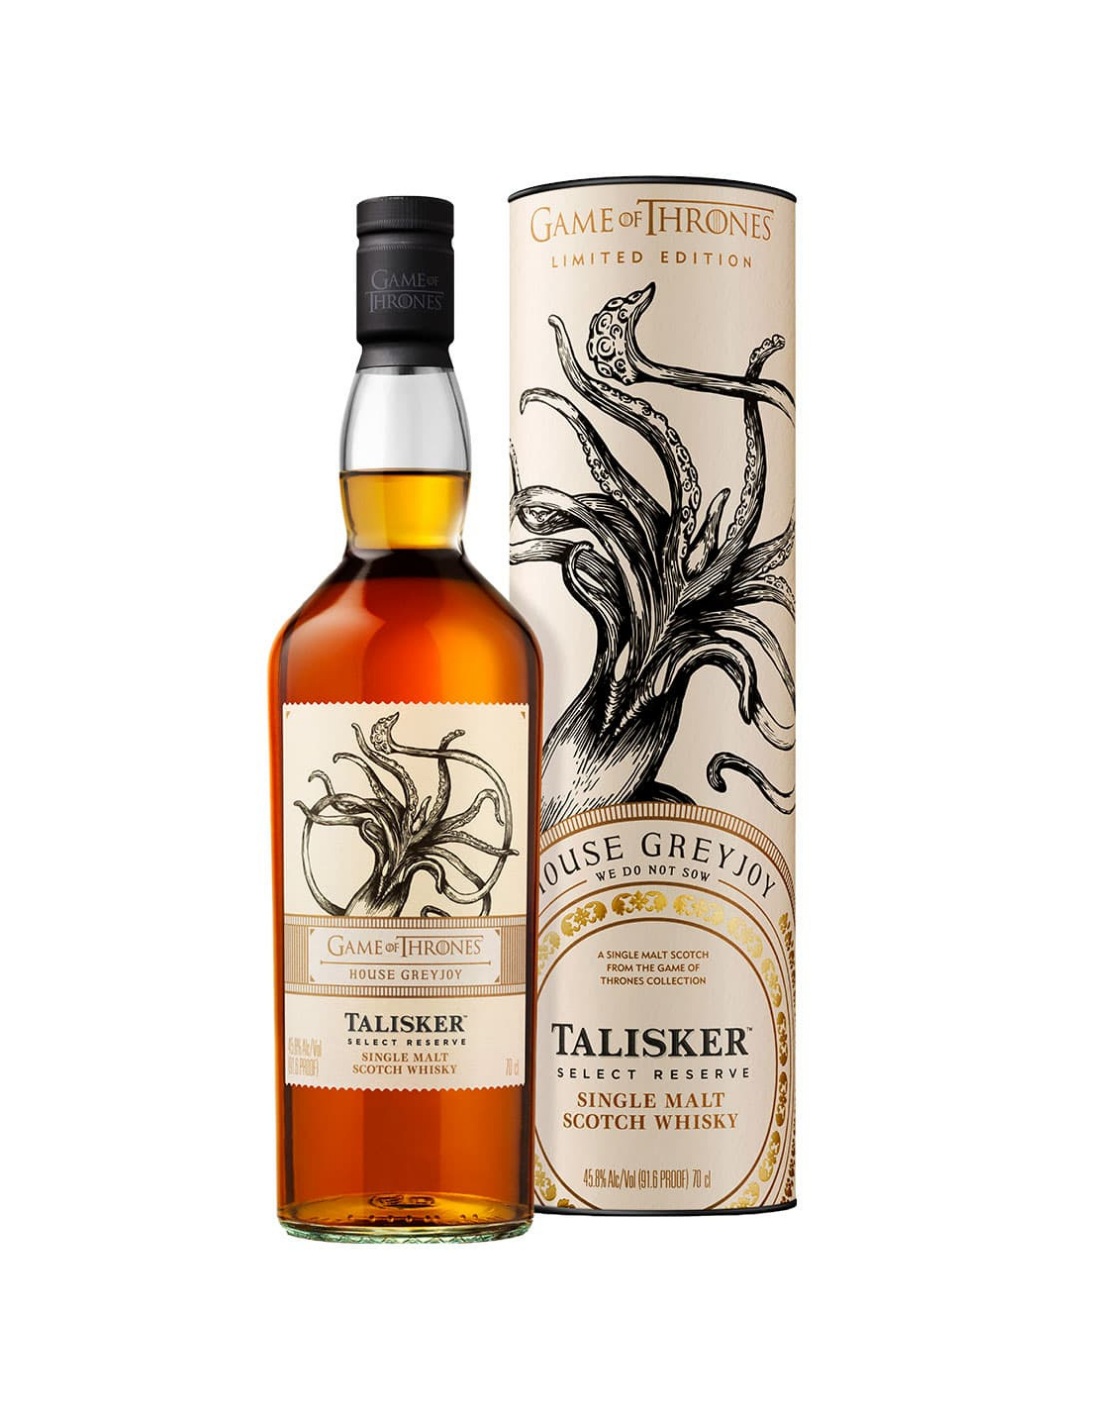 Whisky Talisker Game of Thrones, 0.7L, 45.8% alc., Scotia alcooldiscount.ro